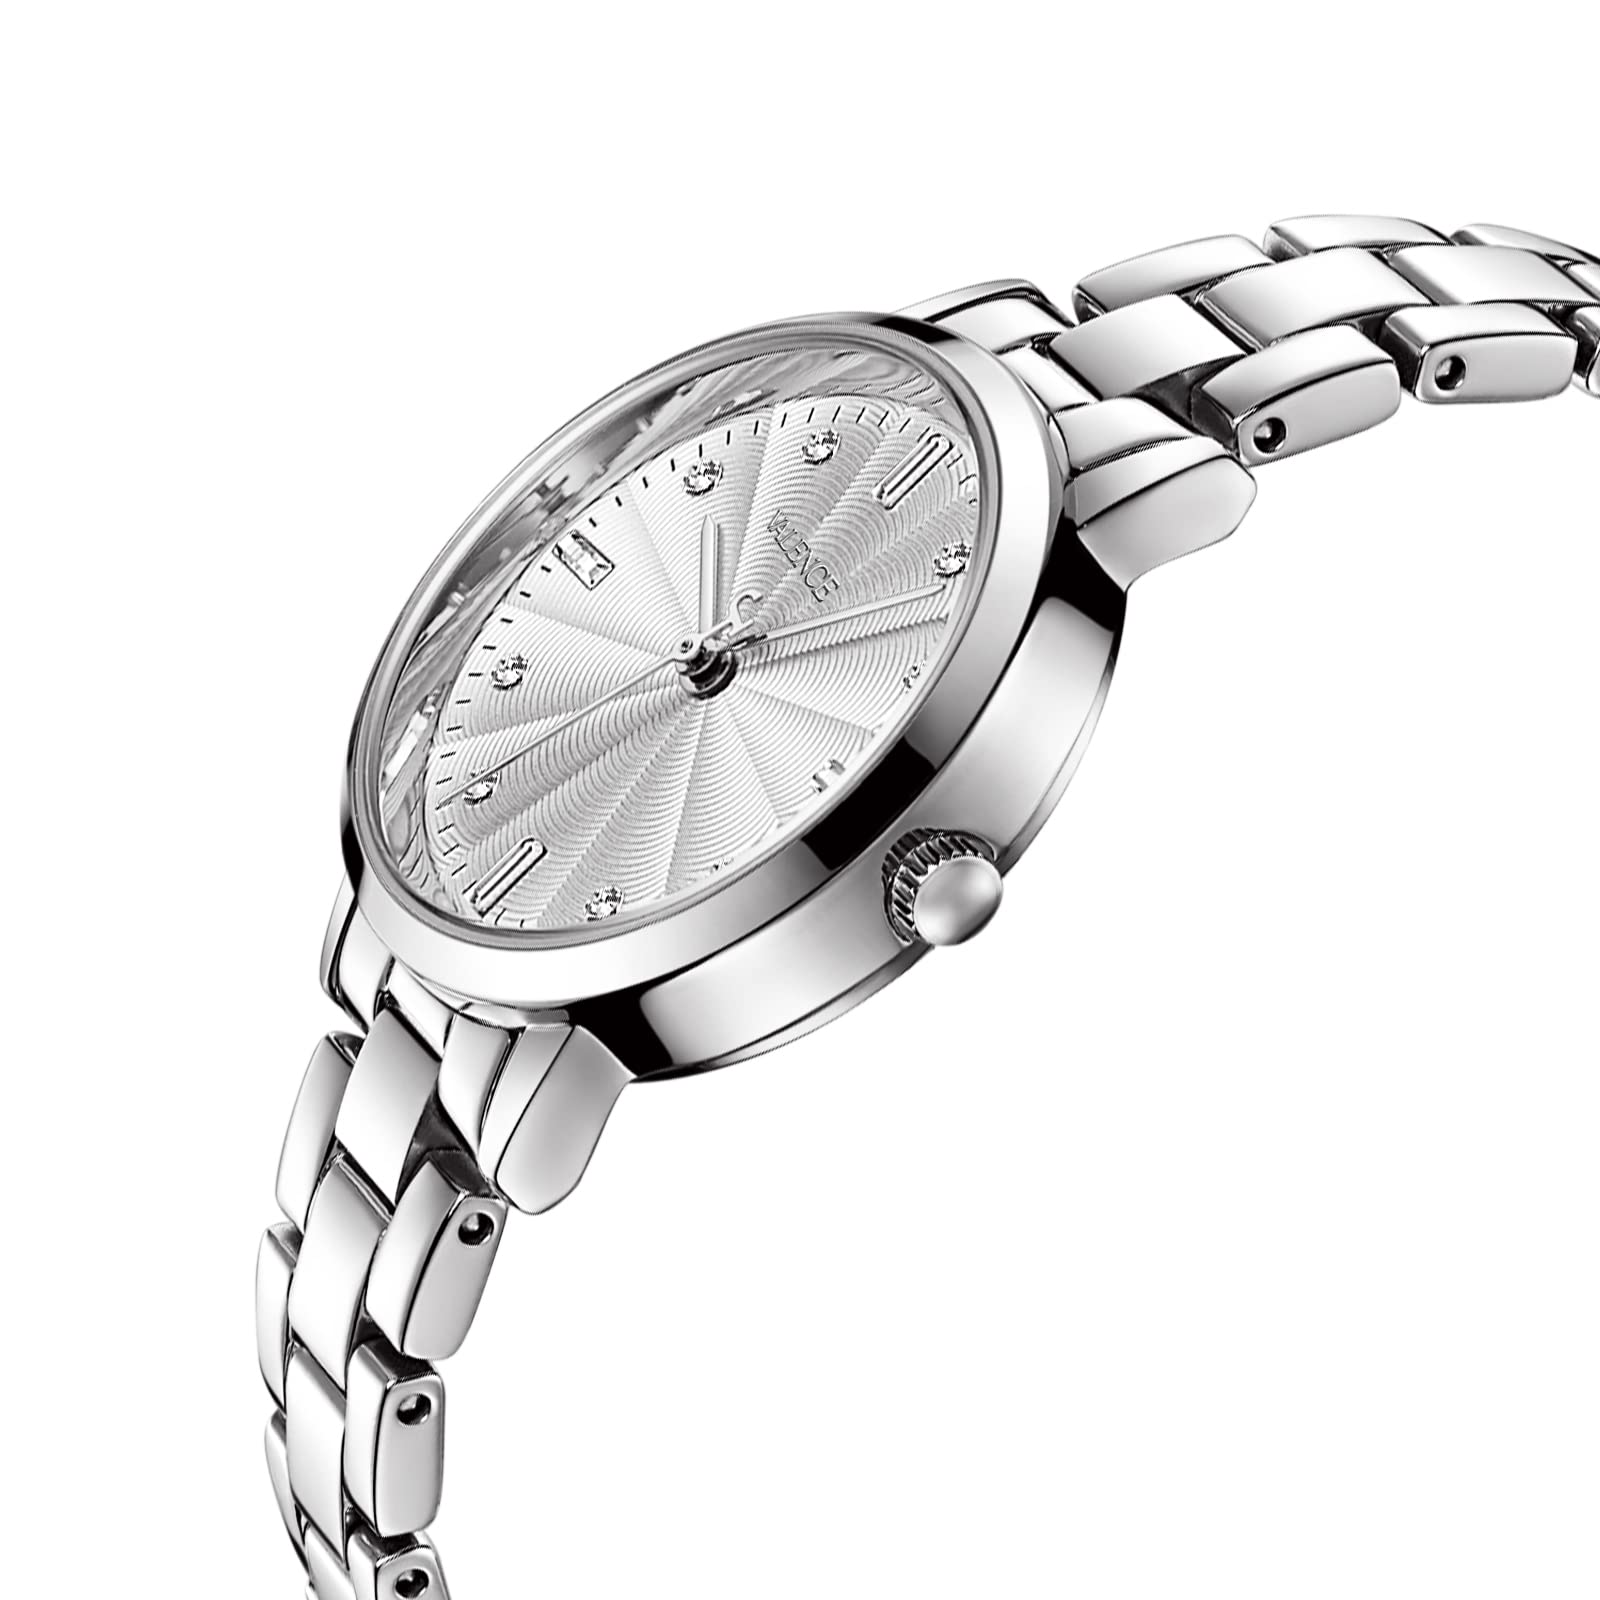 Valence Silver Women's Wrist Watches. Small Band Stainless Steel Luminous Watches for Women. Classic Ladies Quartz Watches with Stainless Steel Band. Womens Waterproof Watch (Model VC81)